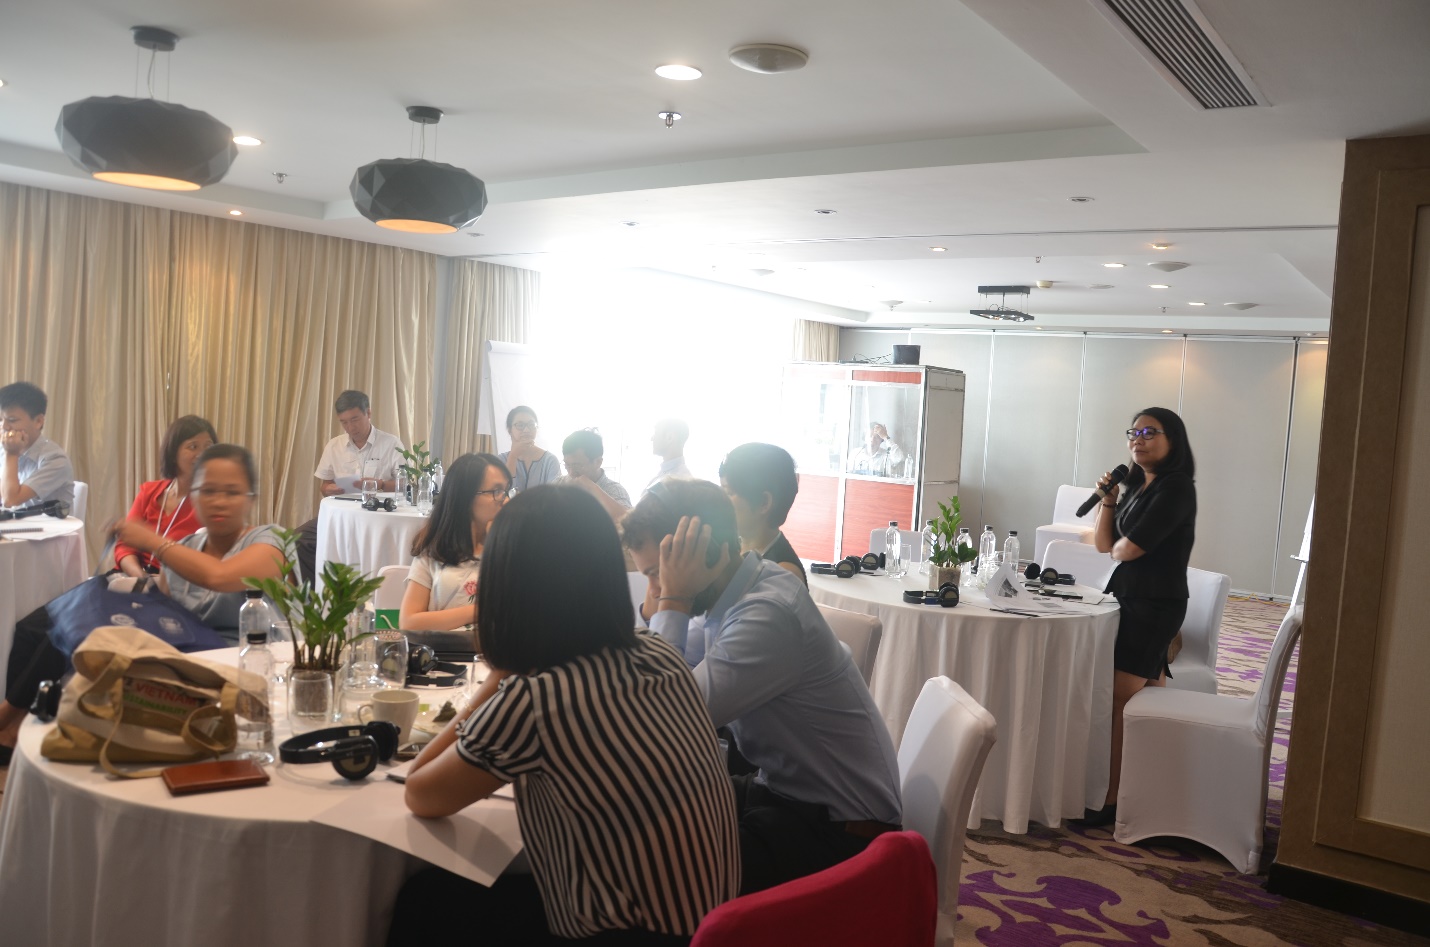 Project kickoff for a new coastal restoration project in Vietnam Teaser: Two kickoff workshops launched a new EbA project focusing on the restoration and co-management of degraded dunes and mangroves in North Central Coast of Vietnam.